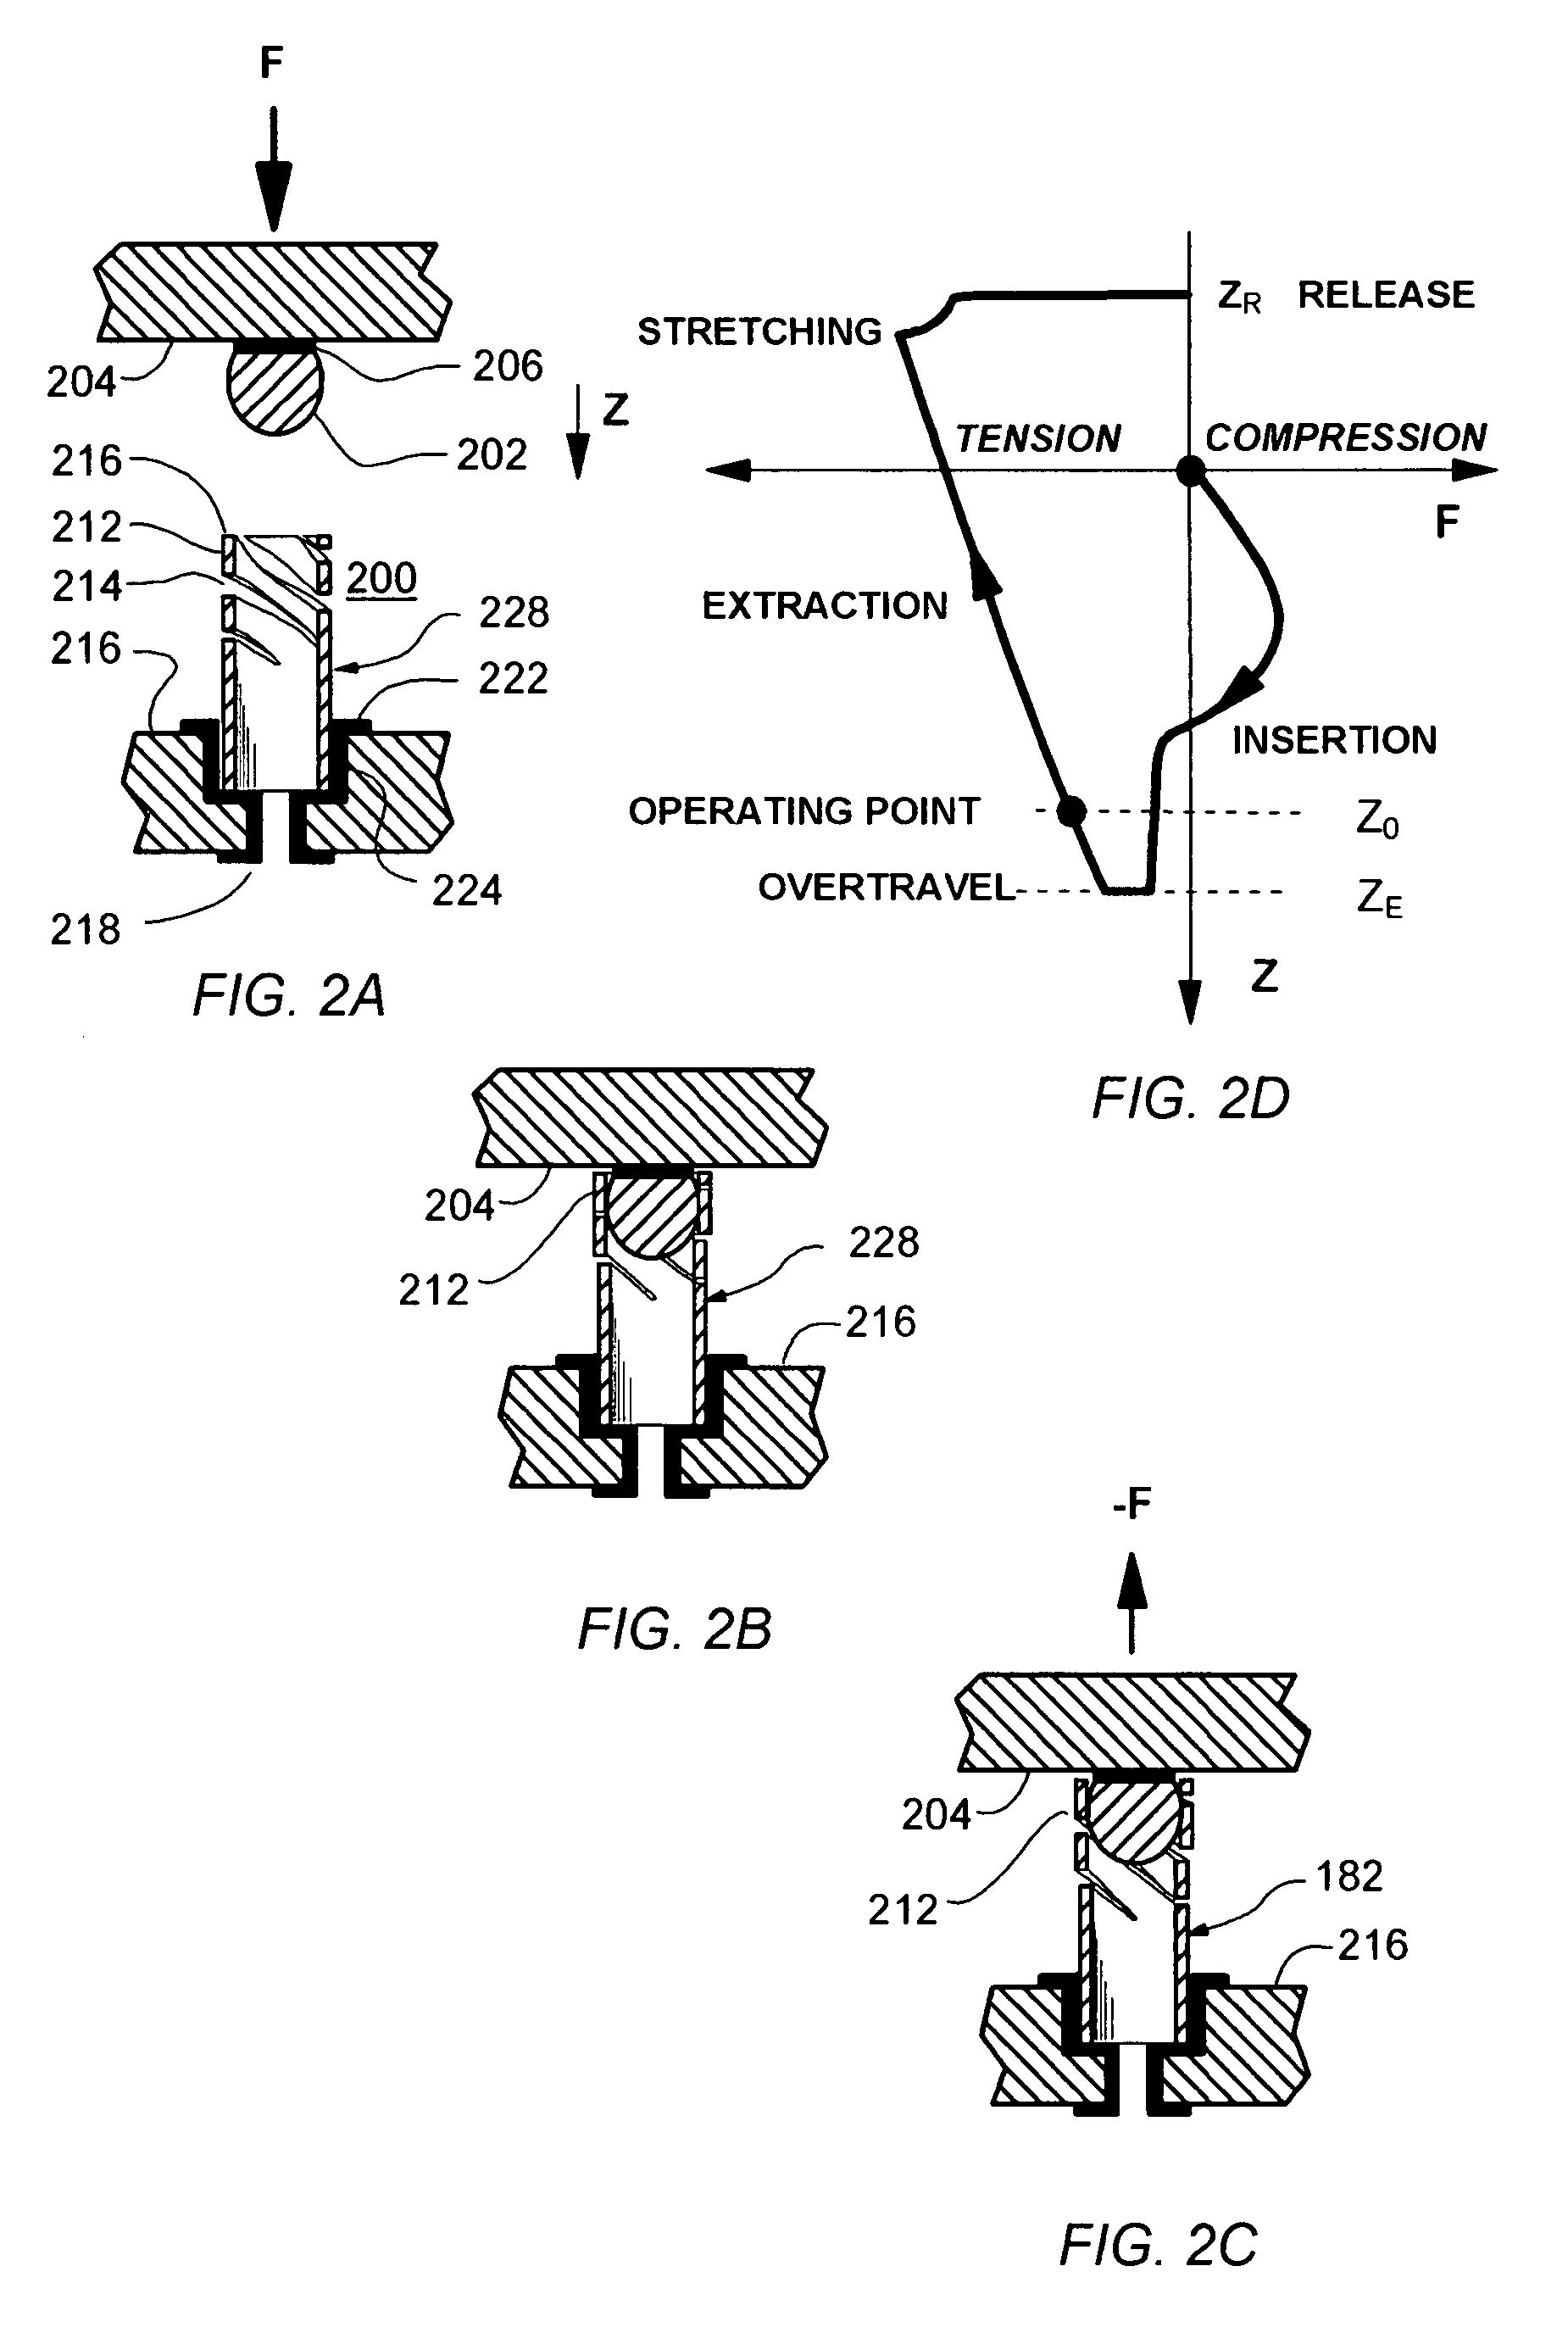 Miniature electrical ball and tube socket with self-capturing multiple-contact-point coupling